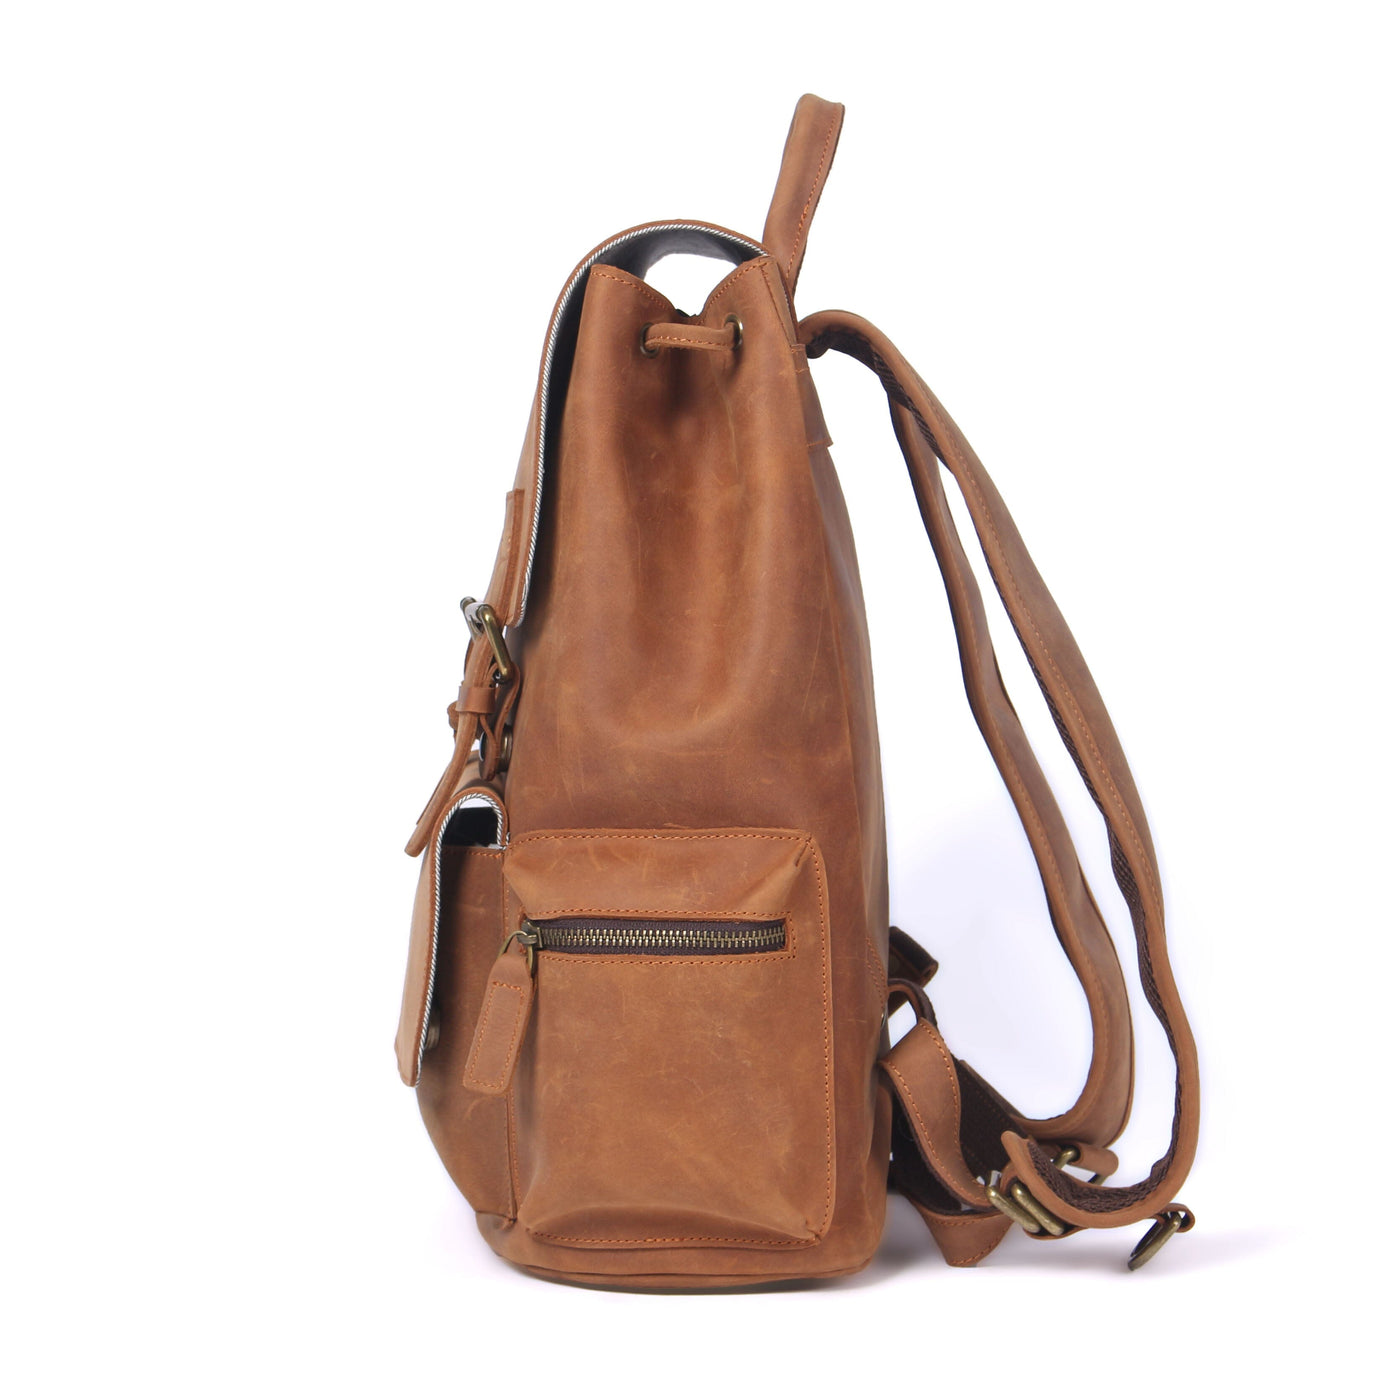 backpack with drawstring and flap